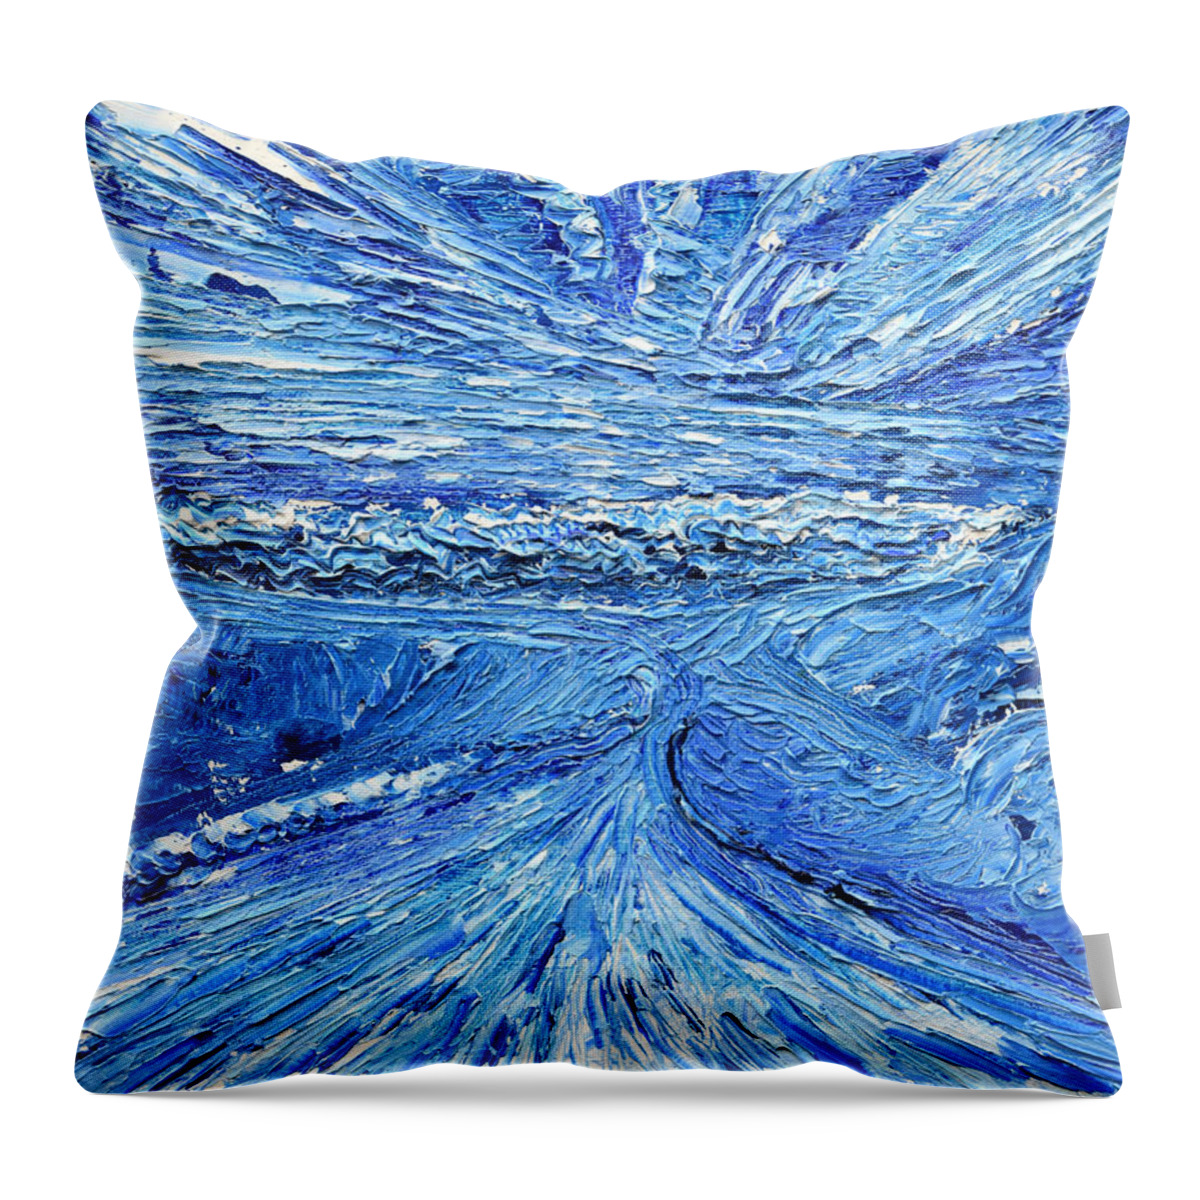 Meribel Throw Pillow featuring the painting Blue Skies by Pete Caswell